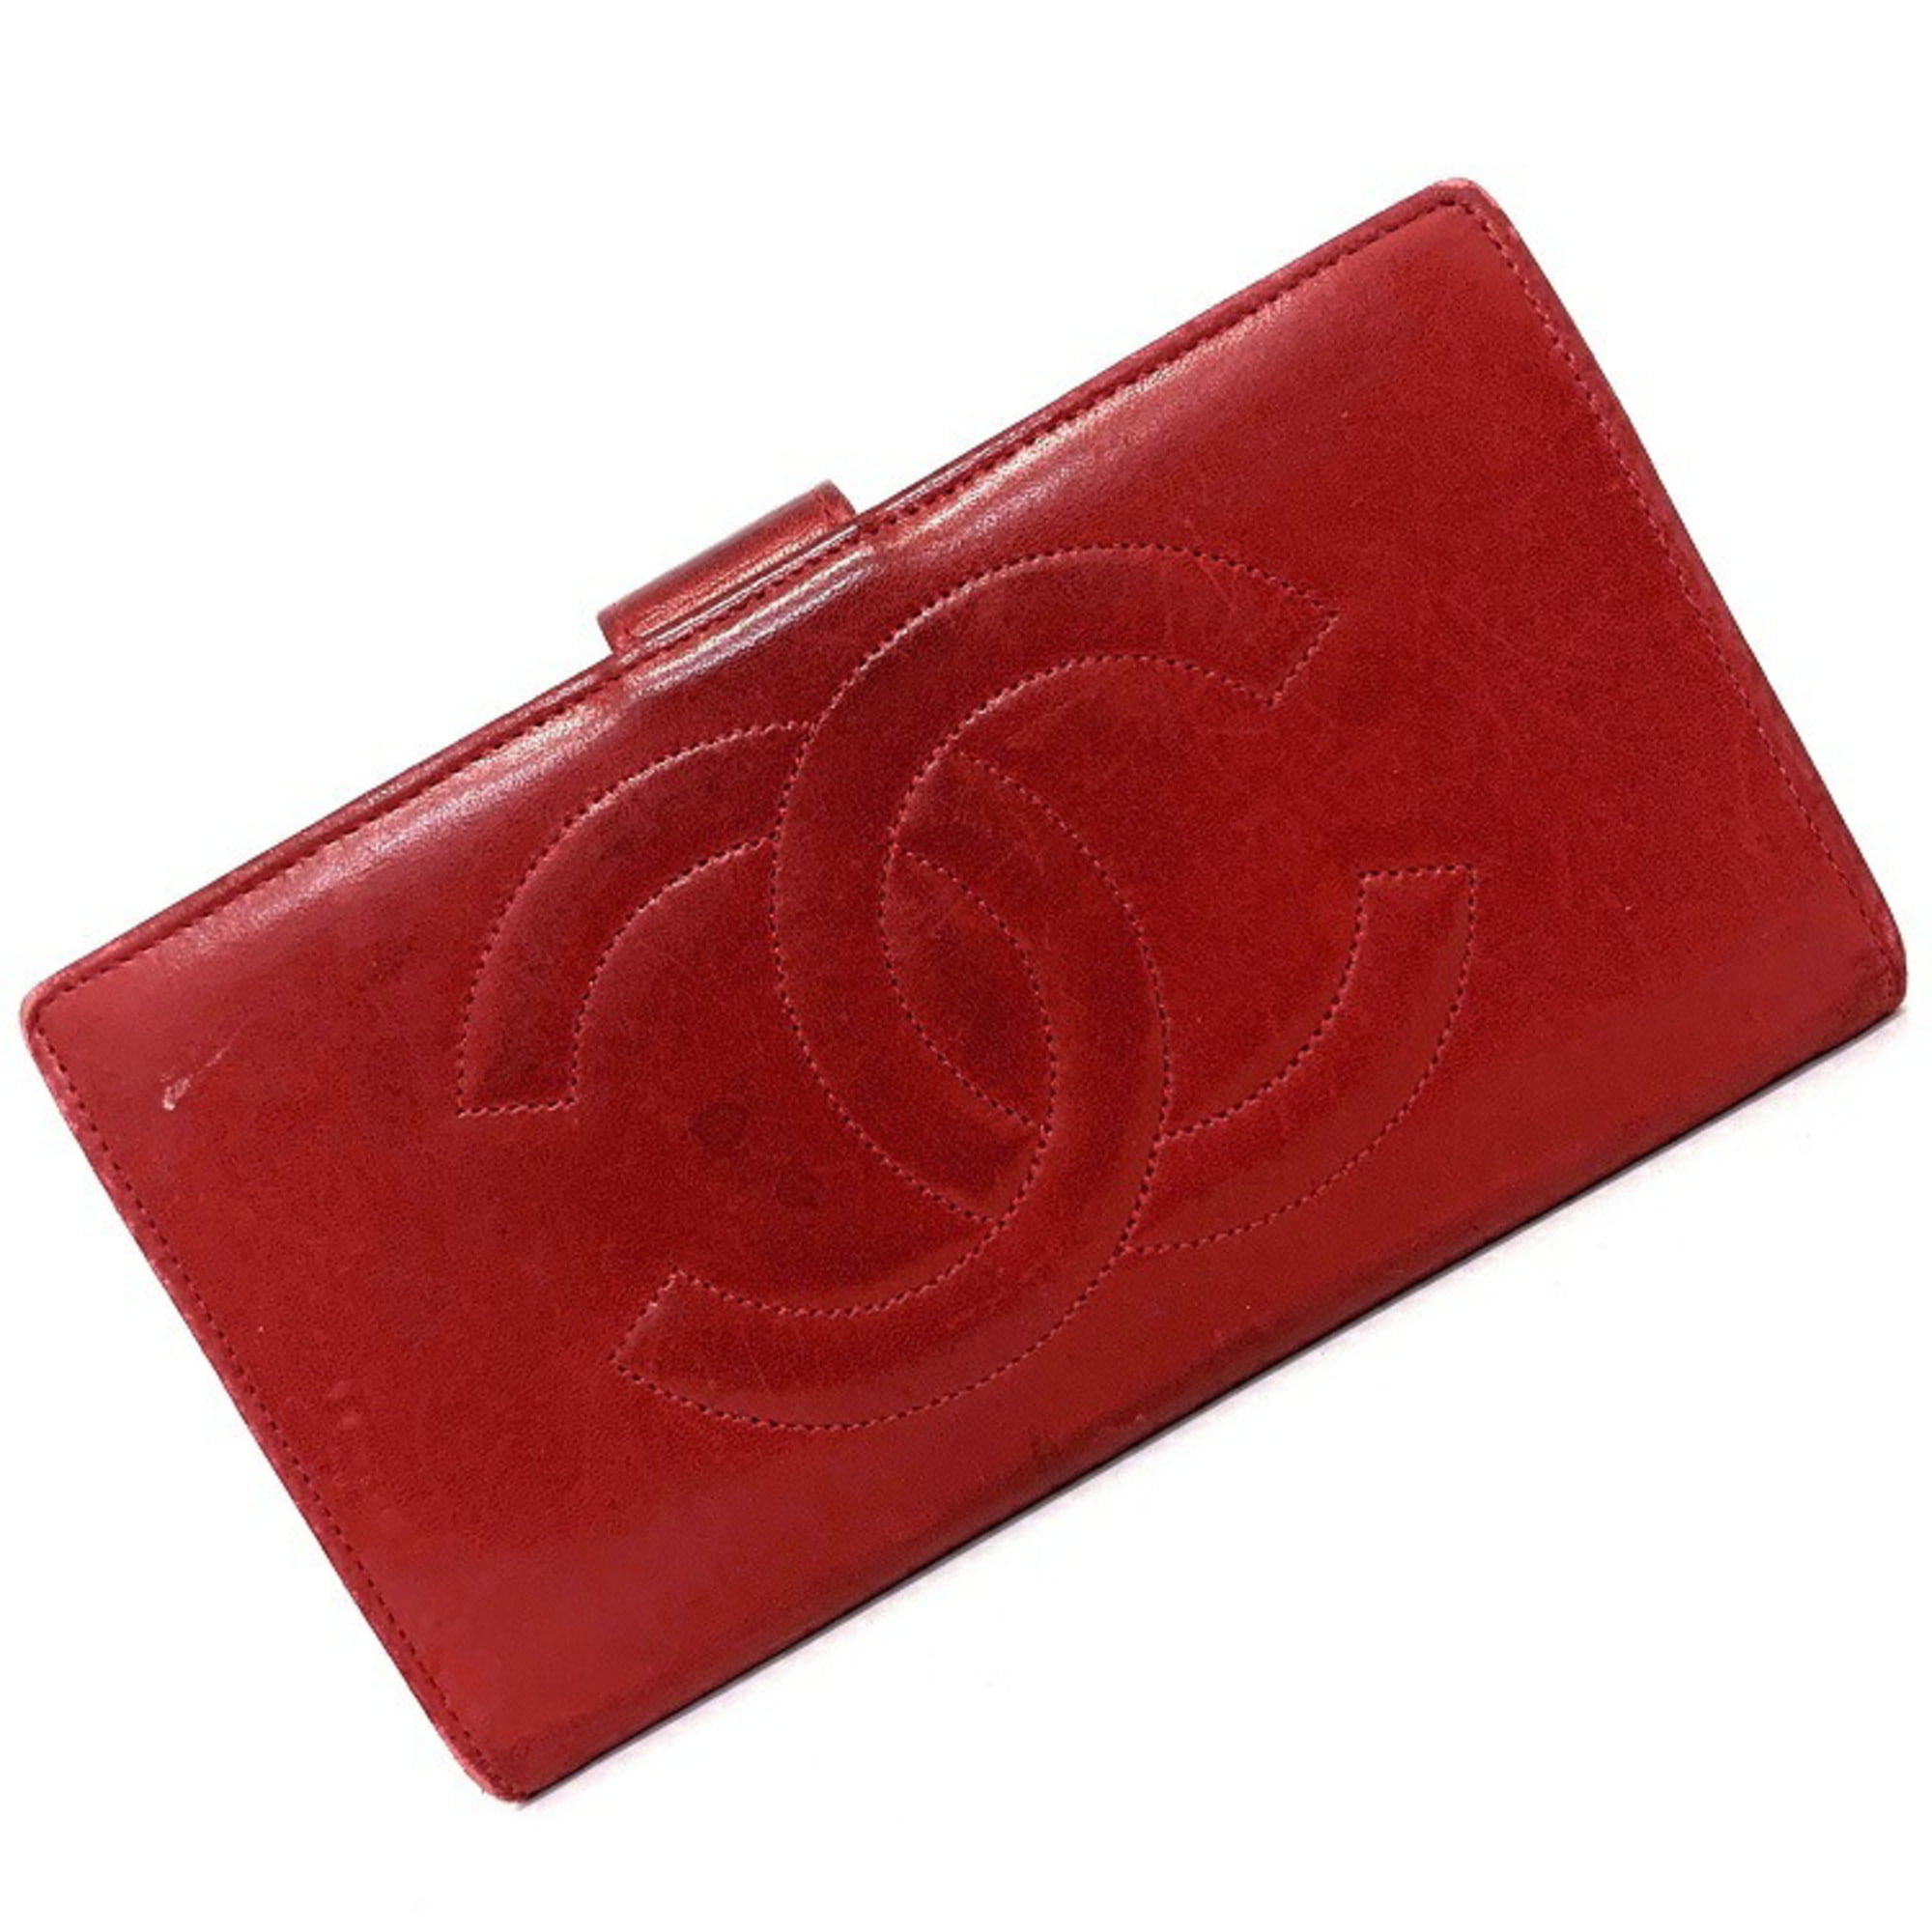 Intuition kradse Tordenvejr Authenticated Used Chanel Gamaguchi Long Wallet Coco Mark A01429 Folded  Lambskin 3rd CHANEL Red Ladies Men's Coin Purse coco - Walmart.com